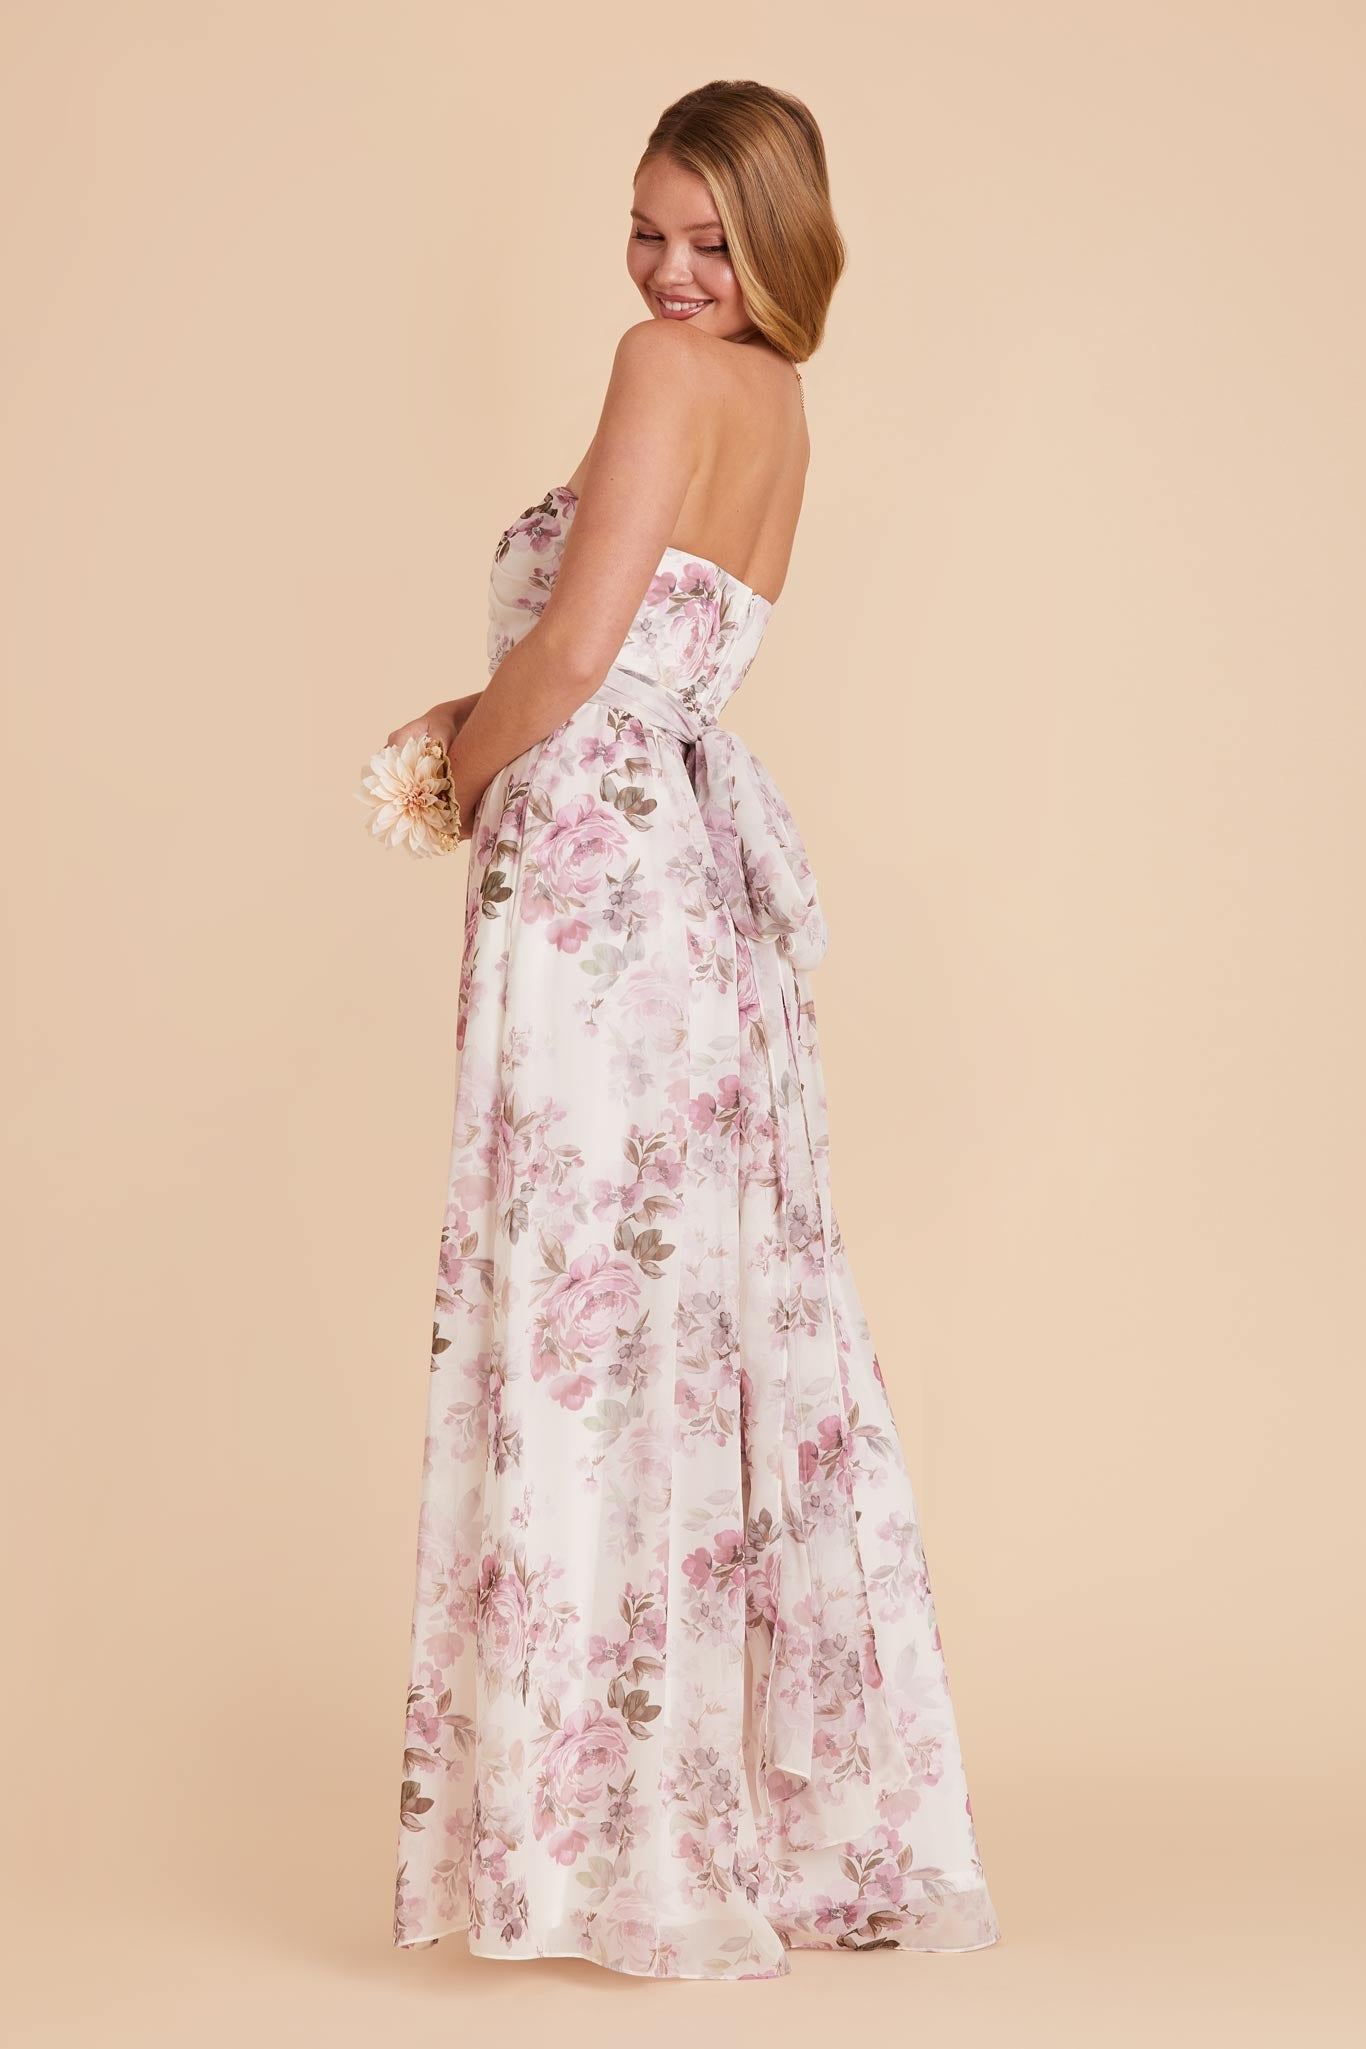  Dusty Pink Peonies Grace Convertible Dress by Birdy Grey